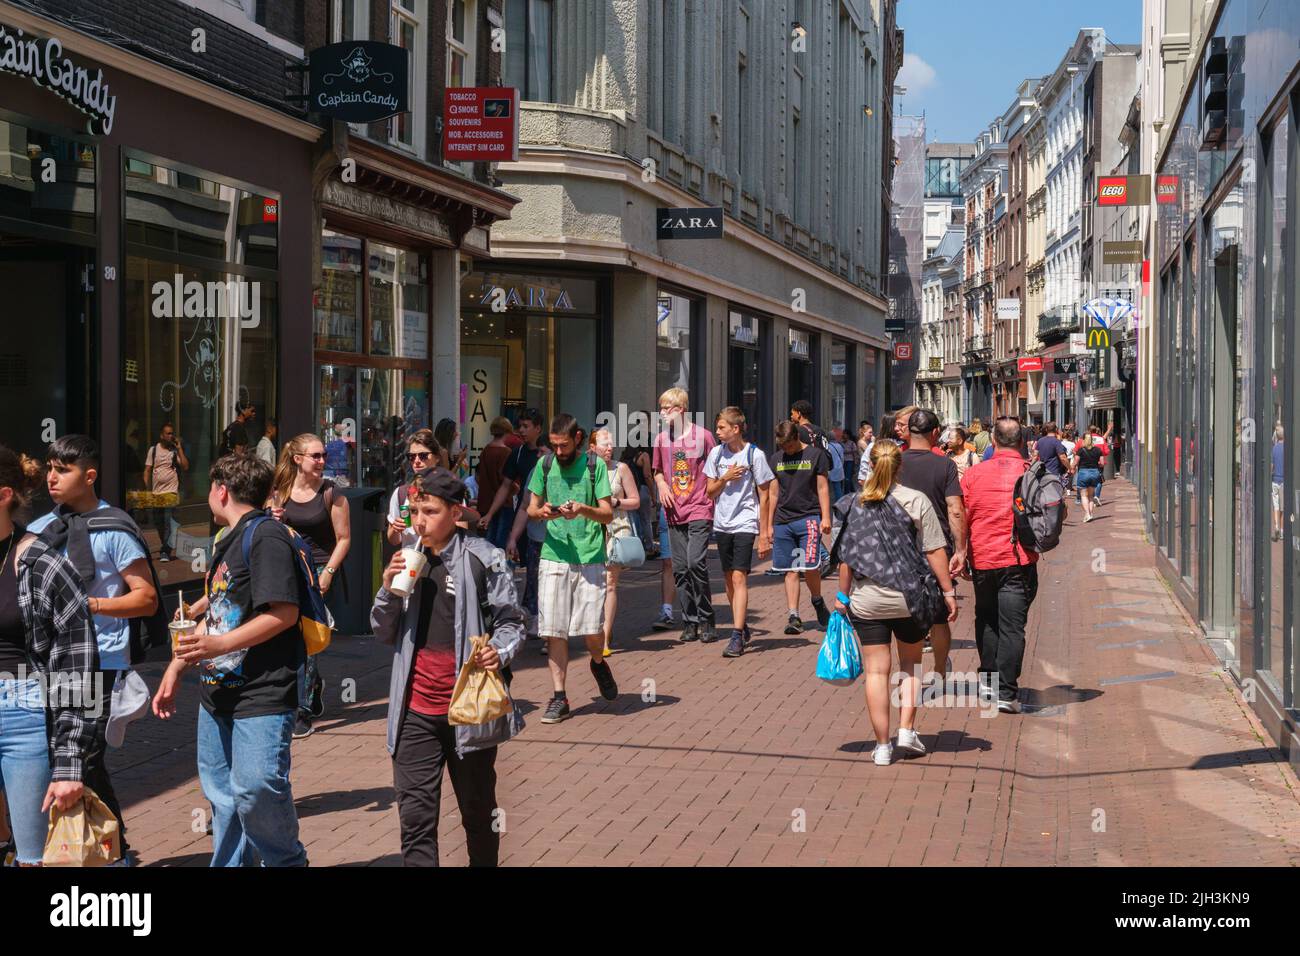 Amsterdam, The Netherlands - 23 June 2022: People walking on narrow street with many stores Stock Photo